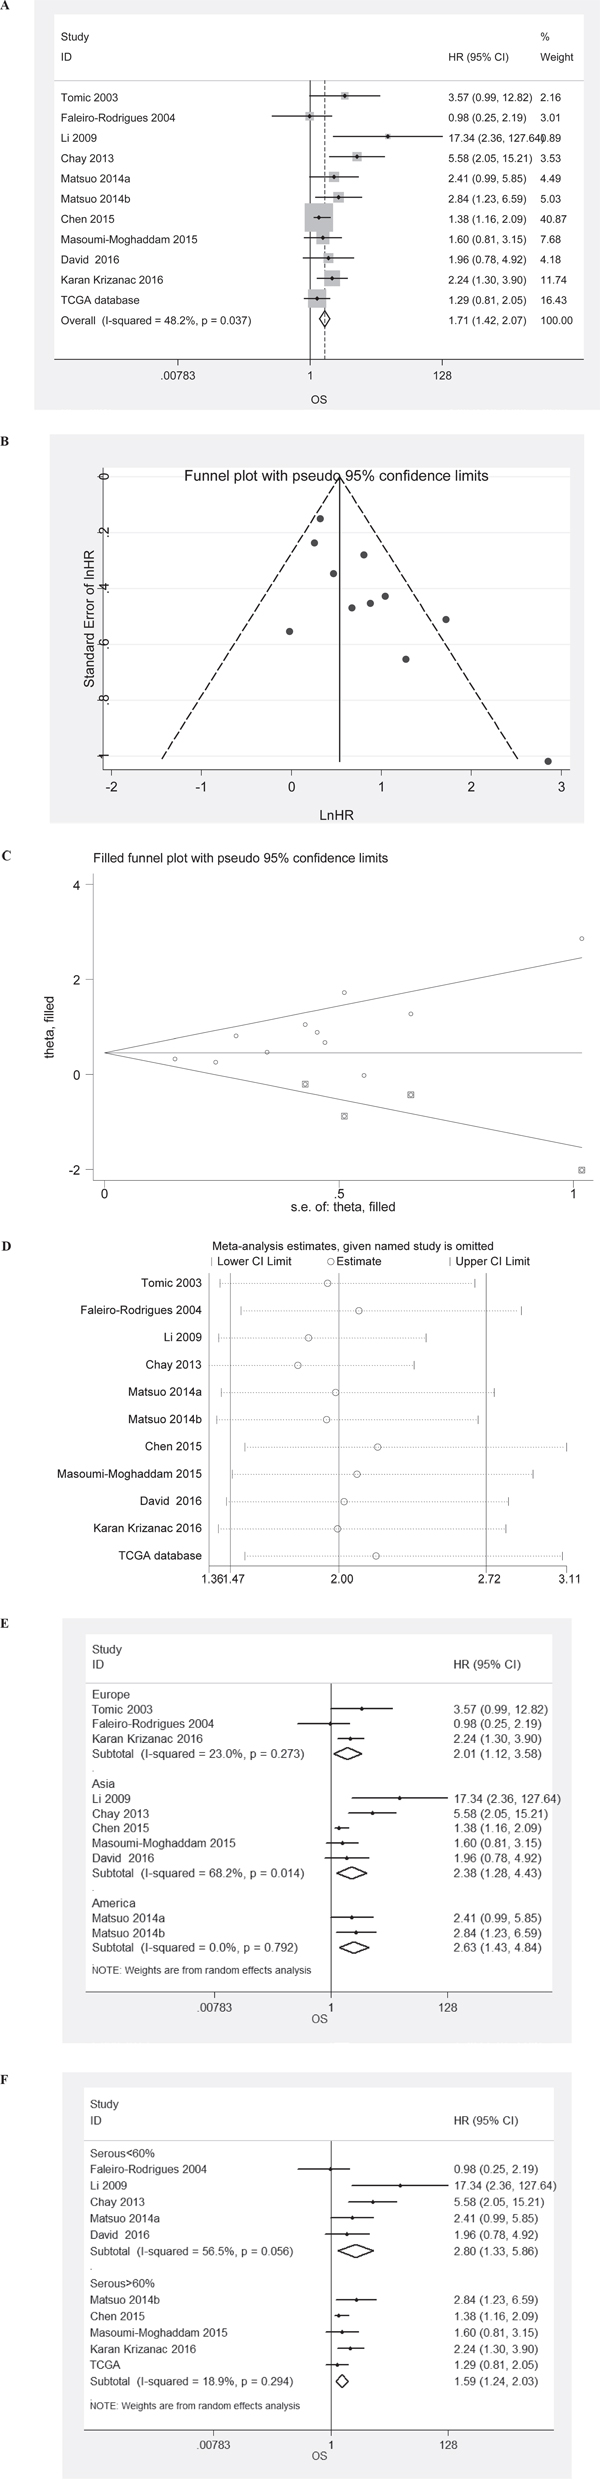 Meta-analysis of the HR for OS for ovarian cancer patients depending on LVSI status.